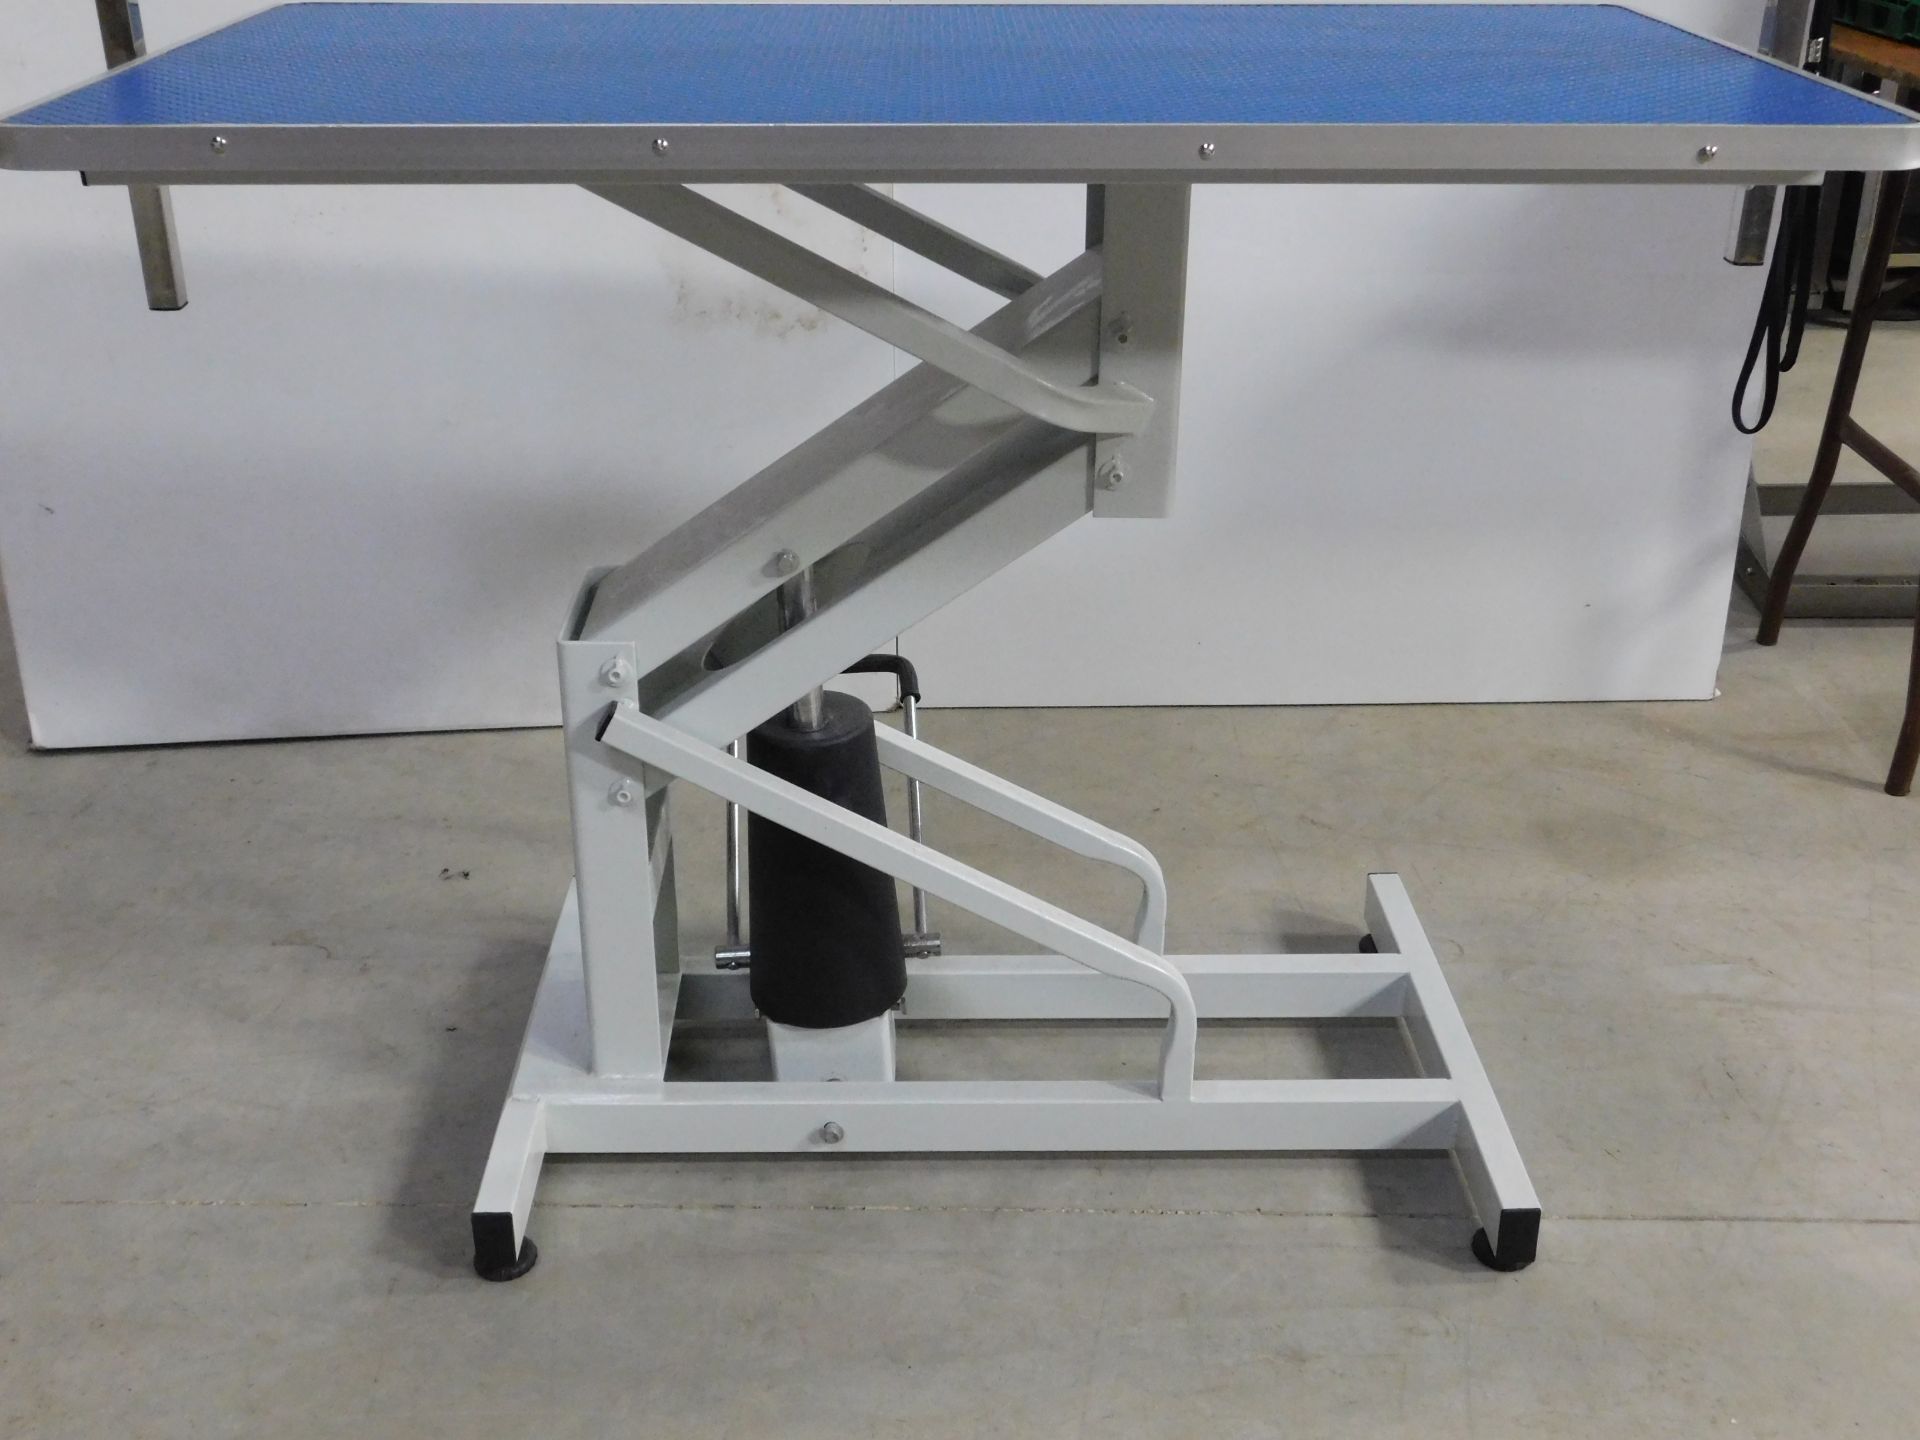 Groom Professional Dog Grooming Hydraulic Table (Location Brentwood. Please Refer to General Notes) - Image 2 of 2